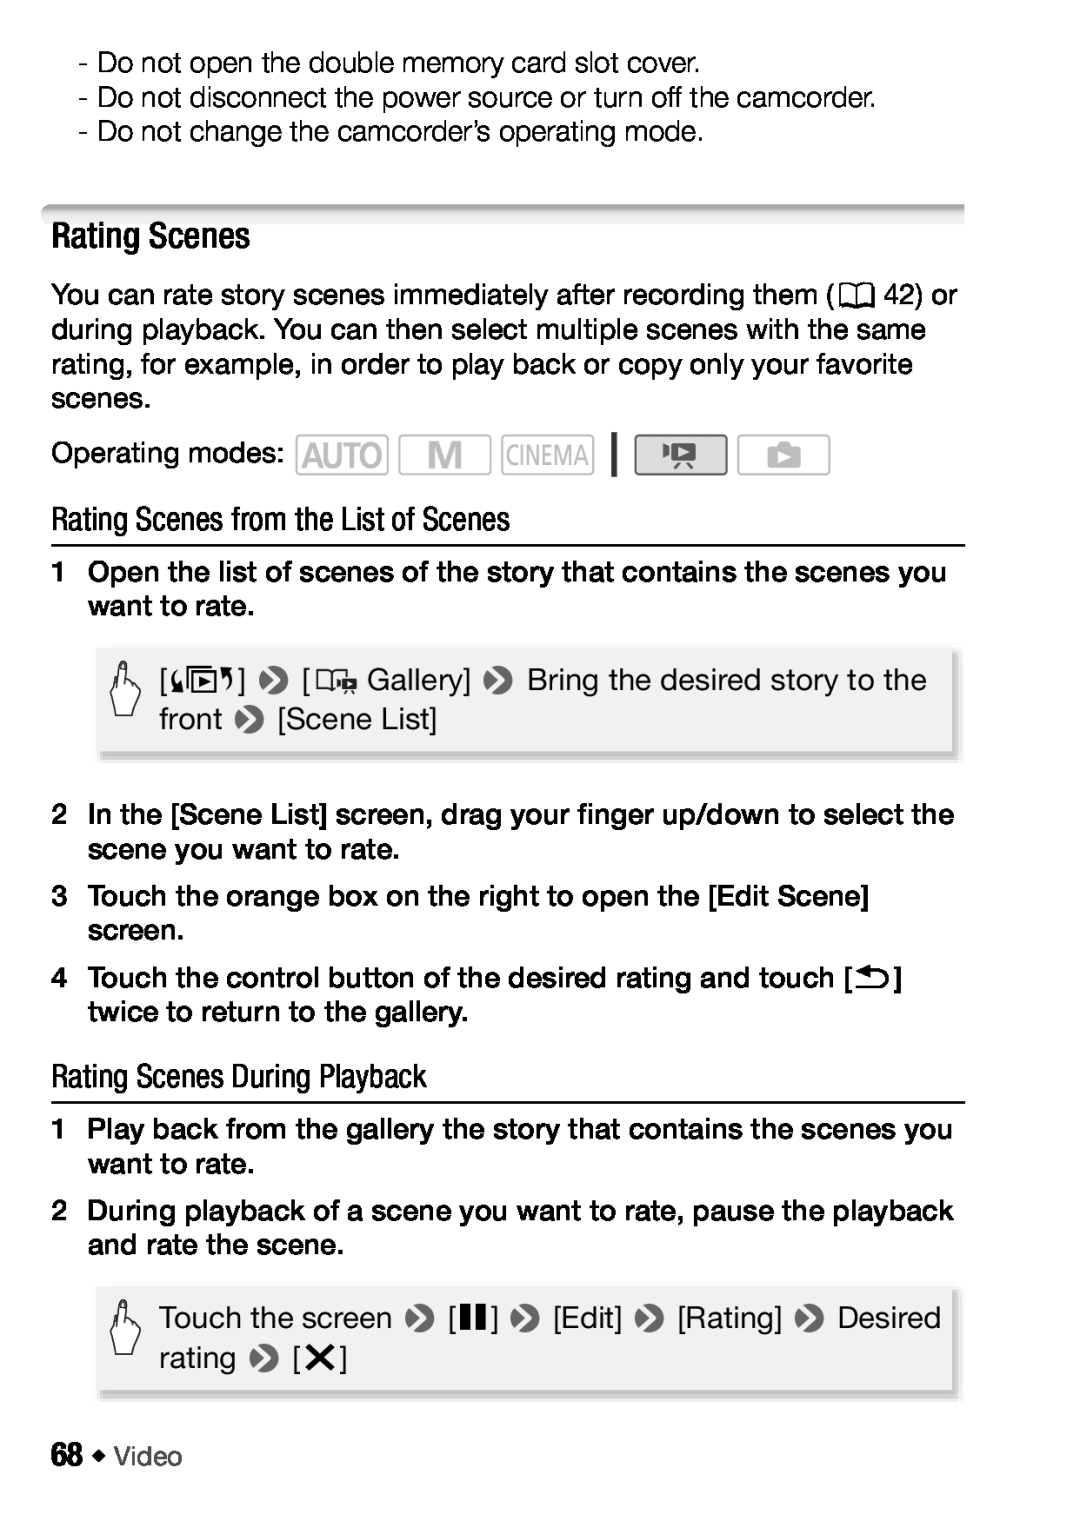 Canon HFM406, HFM46 instruction manual Rating Scenes from the List of Scenes, Rating Scenes During Playback 